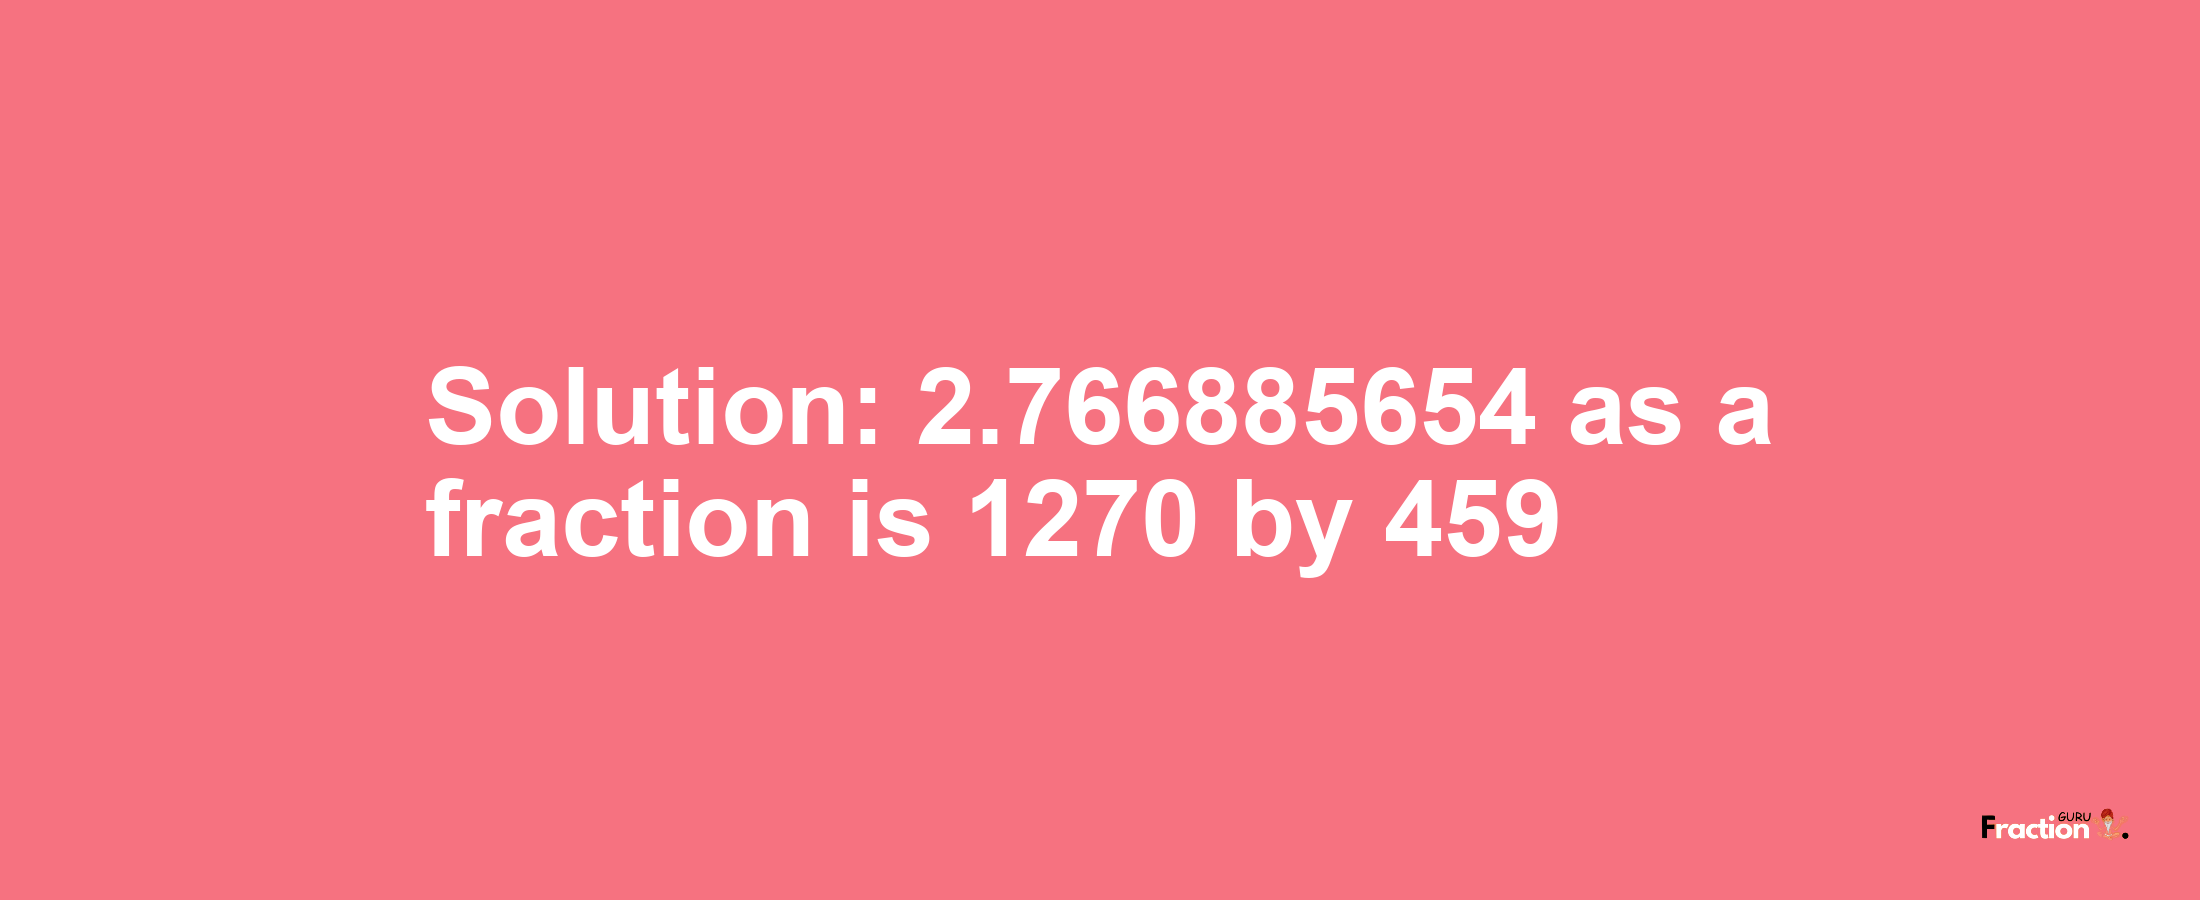 Solution:2.766885654 as a fraction is 1270/459